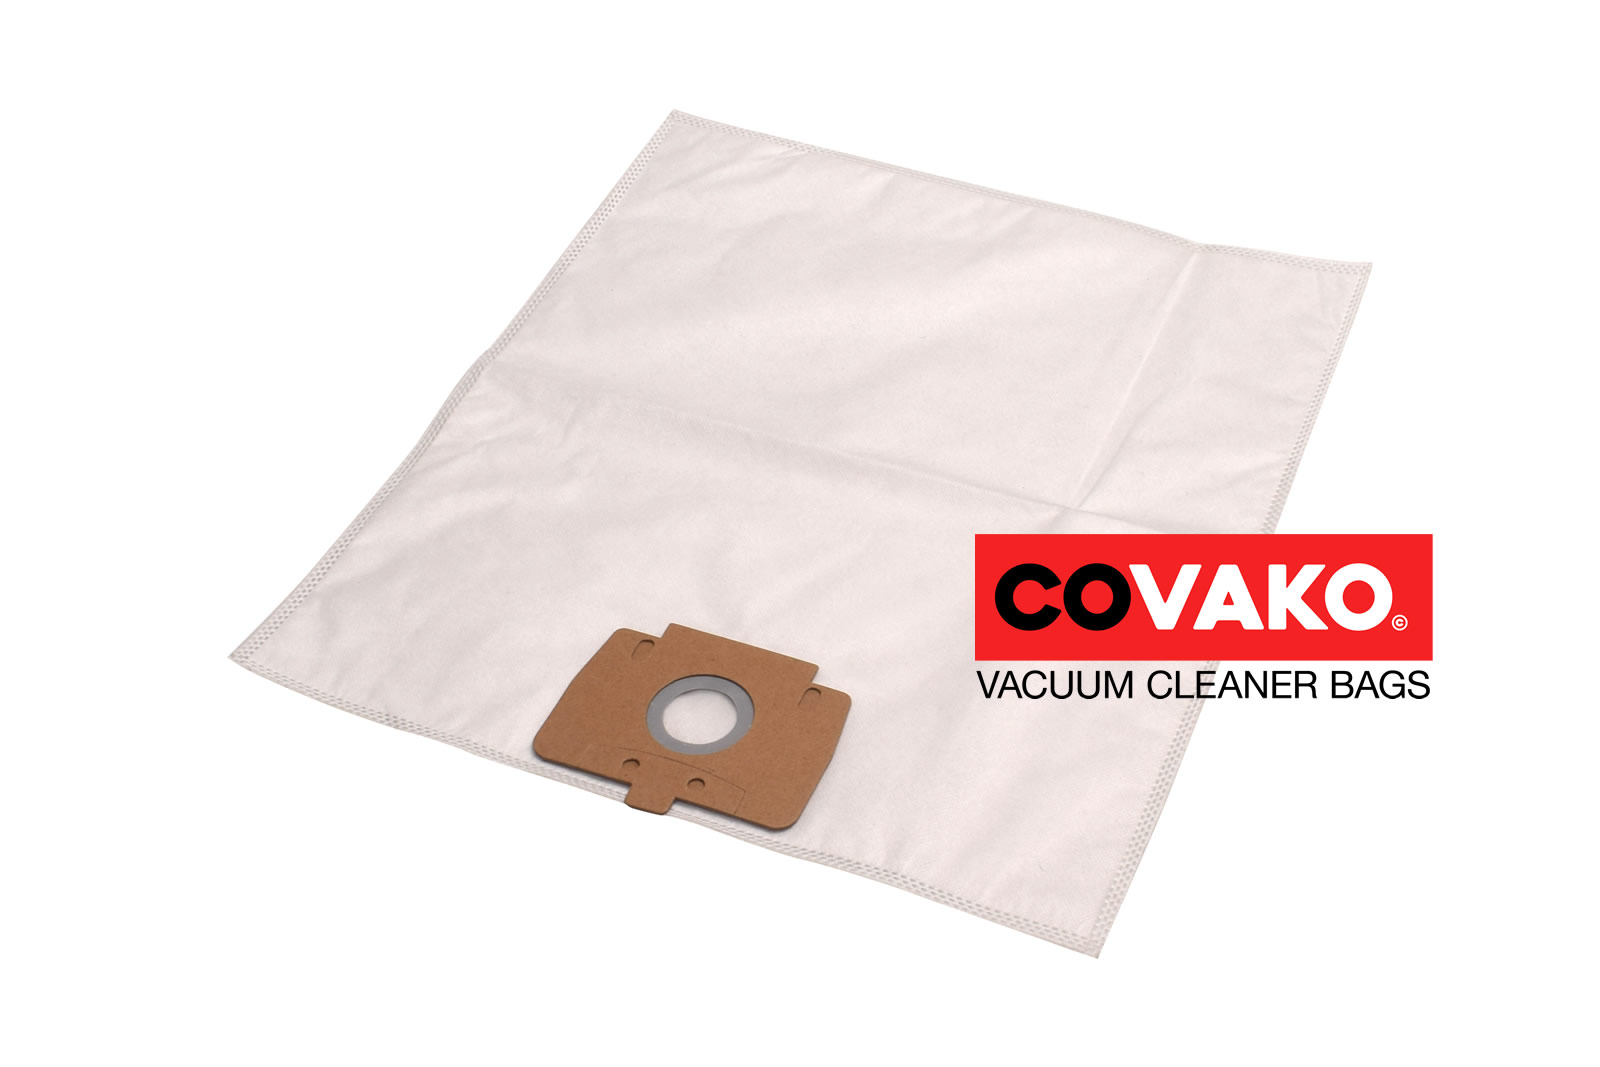 Ecolab S 142 B / Synthesis - Ecolab vacuum cleaner bags